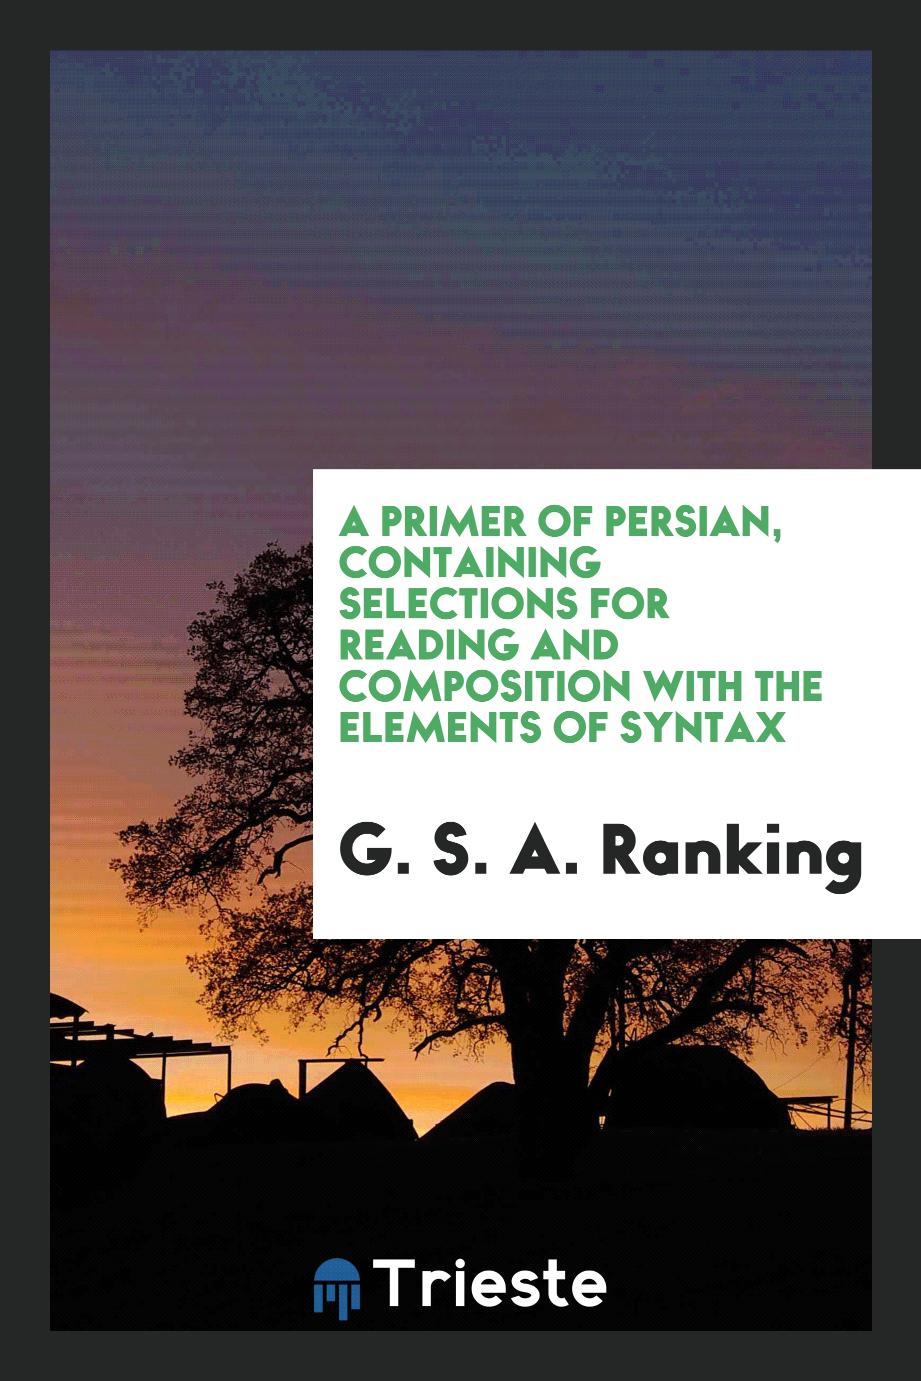 A Primer of Persian, Containing Selections for Reading and Composition with the Elements of Syntax